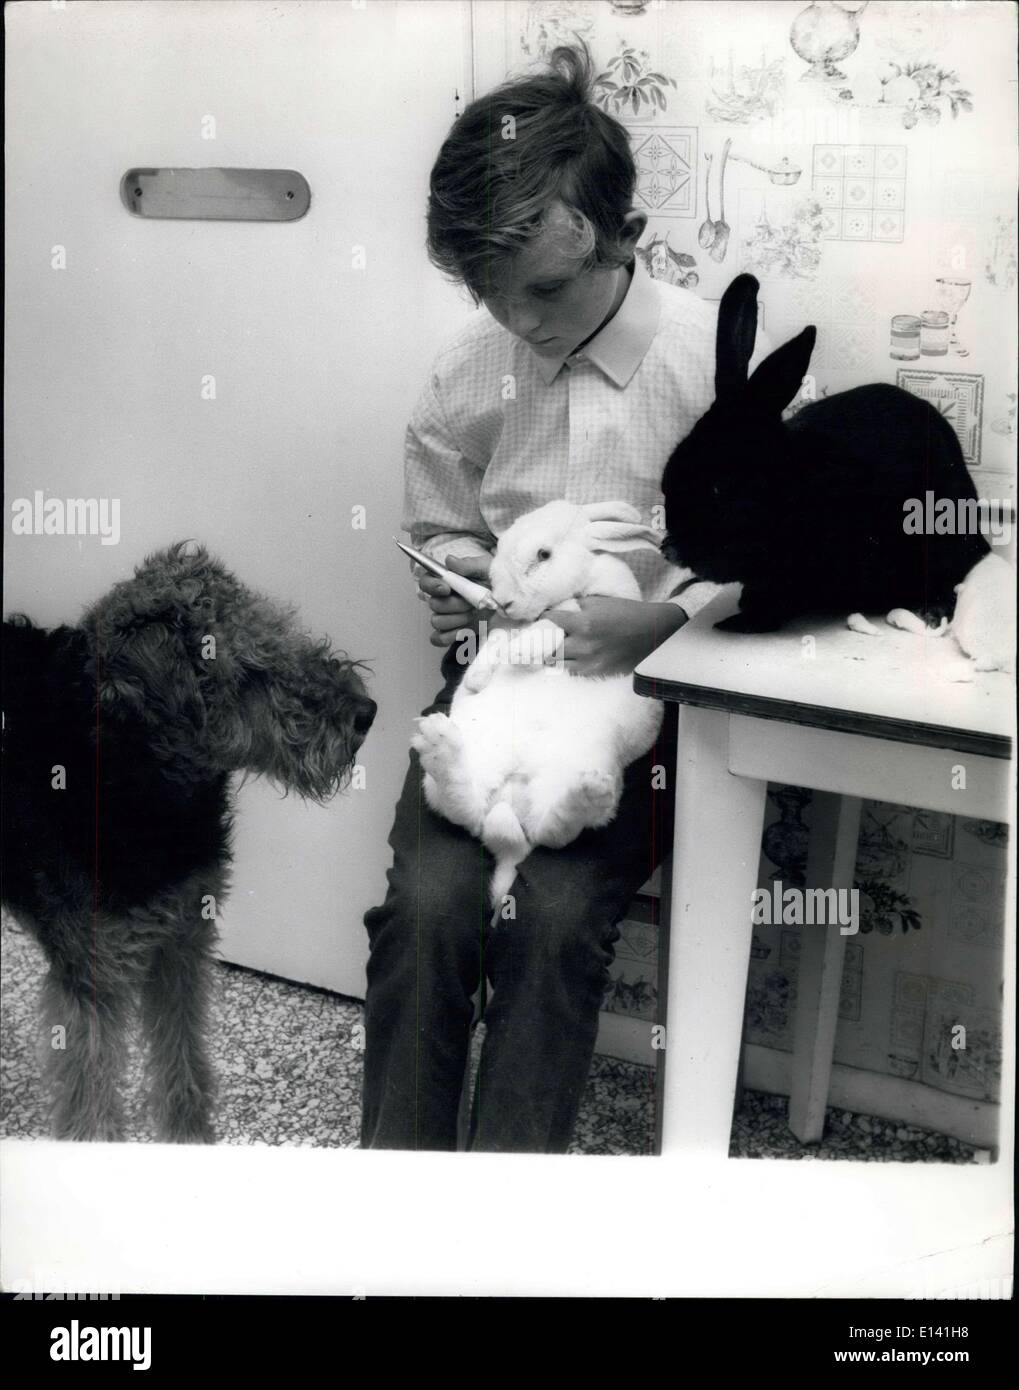 Mar. 31, 2012 - Peter Rattray with Snowie and Blackie, two rabbits in his care, and Shane the airedale looks on. Stock Photo